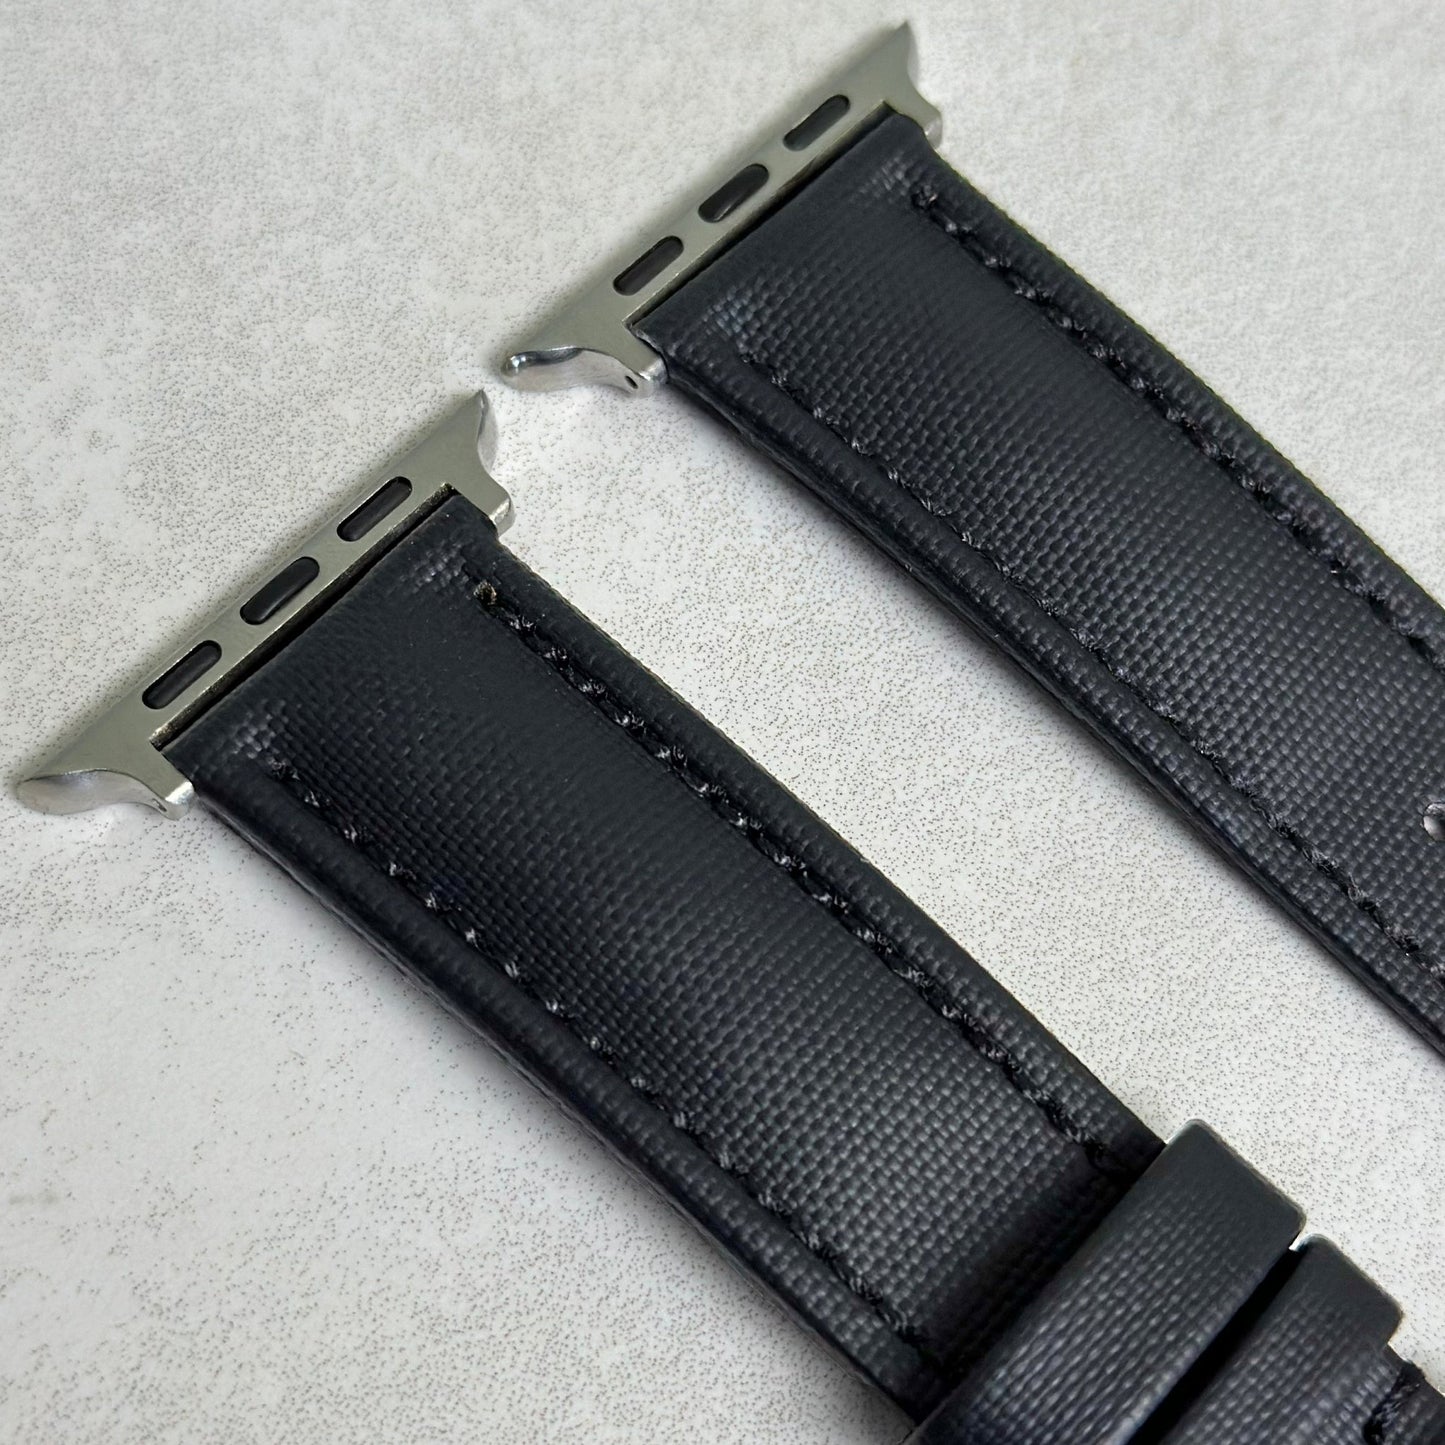 Top of the Bermuda jet black sail cloth Apple Watch strap. Oxford weave sail cloth. Watch And Strap.